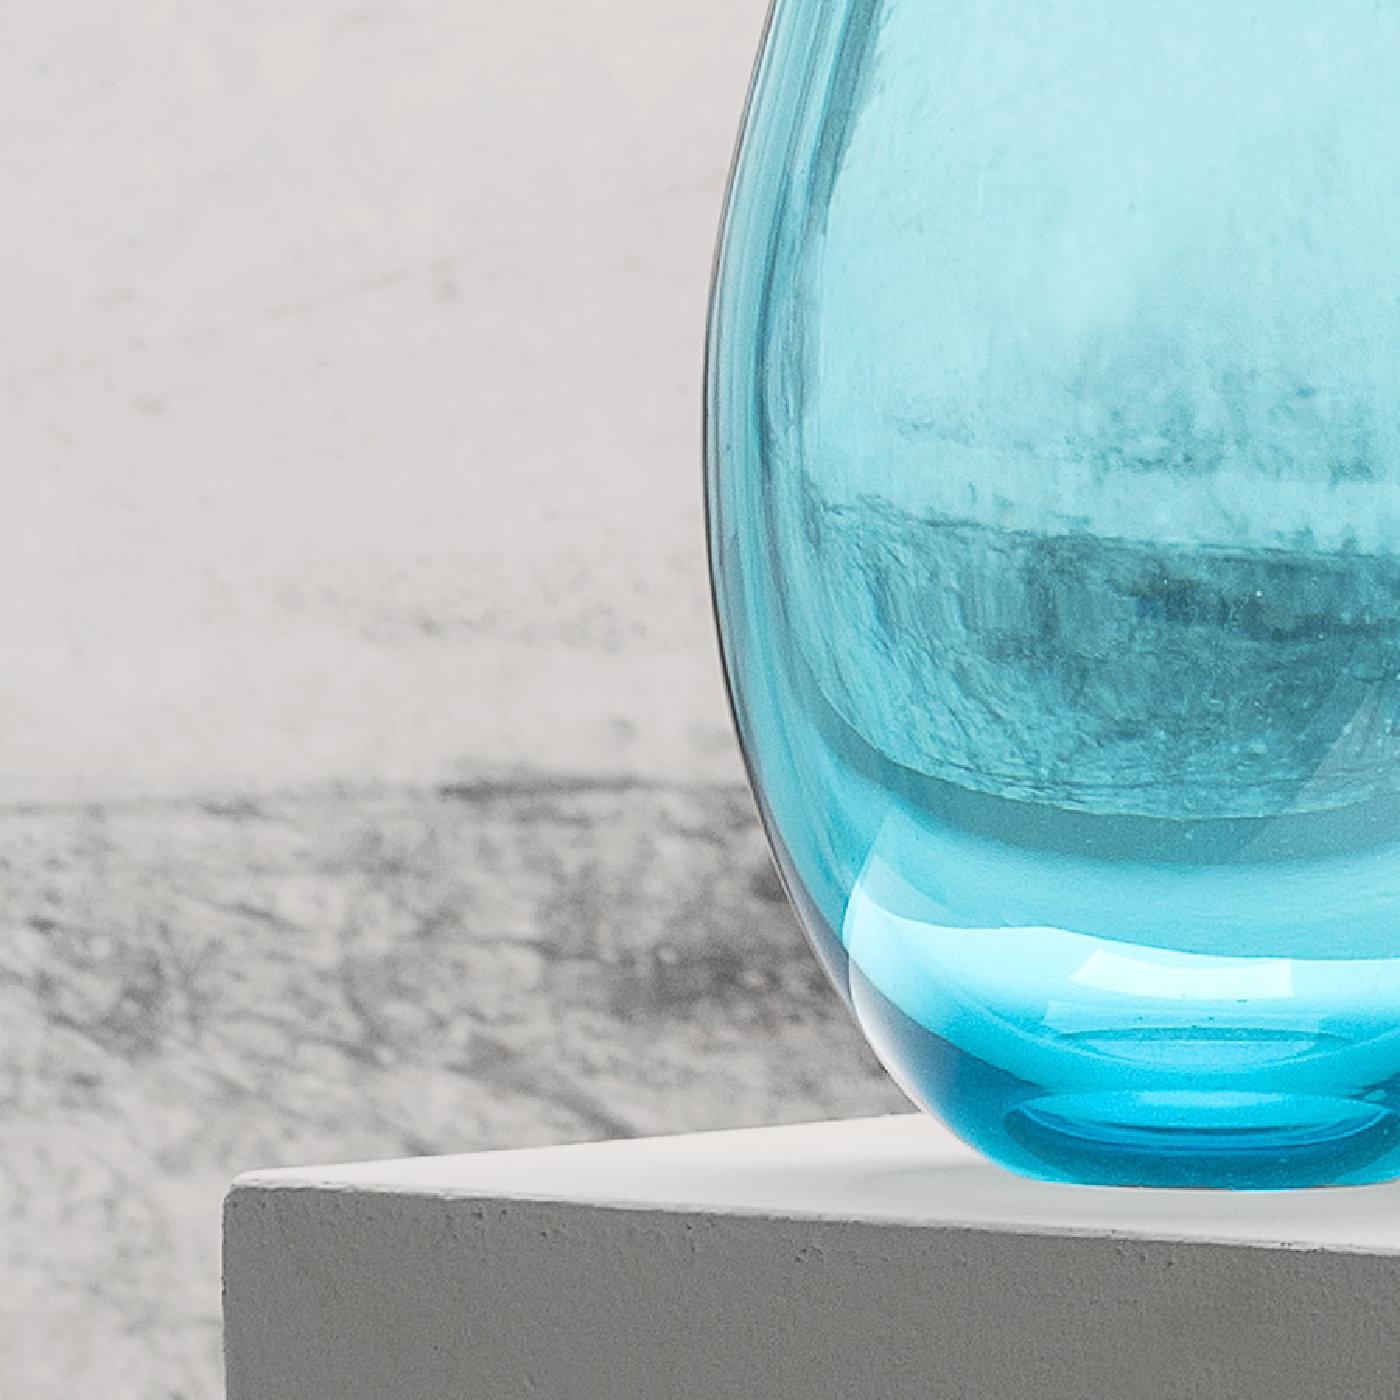 A striking addition to a contemporary home, this vase is part of a collection of colorful and sophisticated vases designed by Karim Rashid in 2013. This piece was entirely crafted of mouth-blown Murano glass and its shape is elongated and elegant,